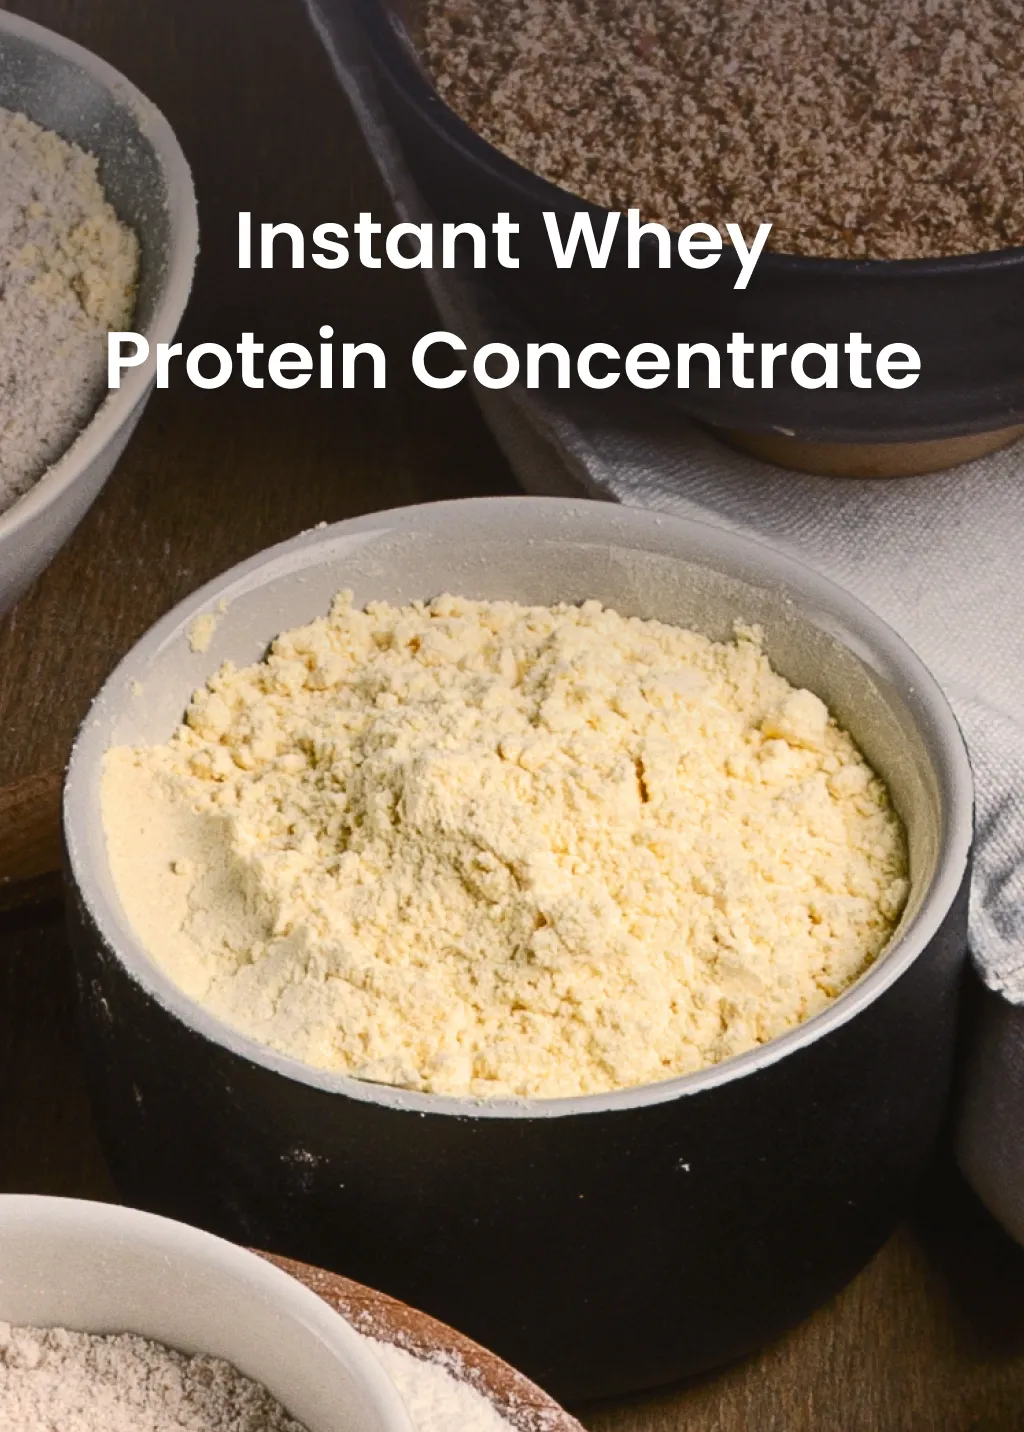 Instant Whey Protein Concentrate from Milk Powder Asia